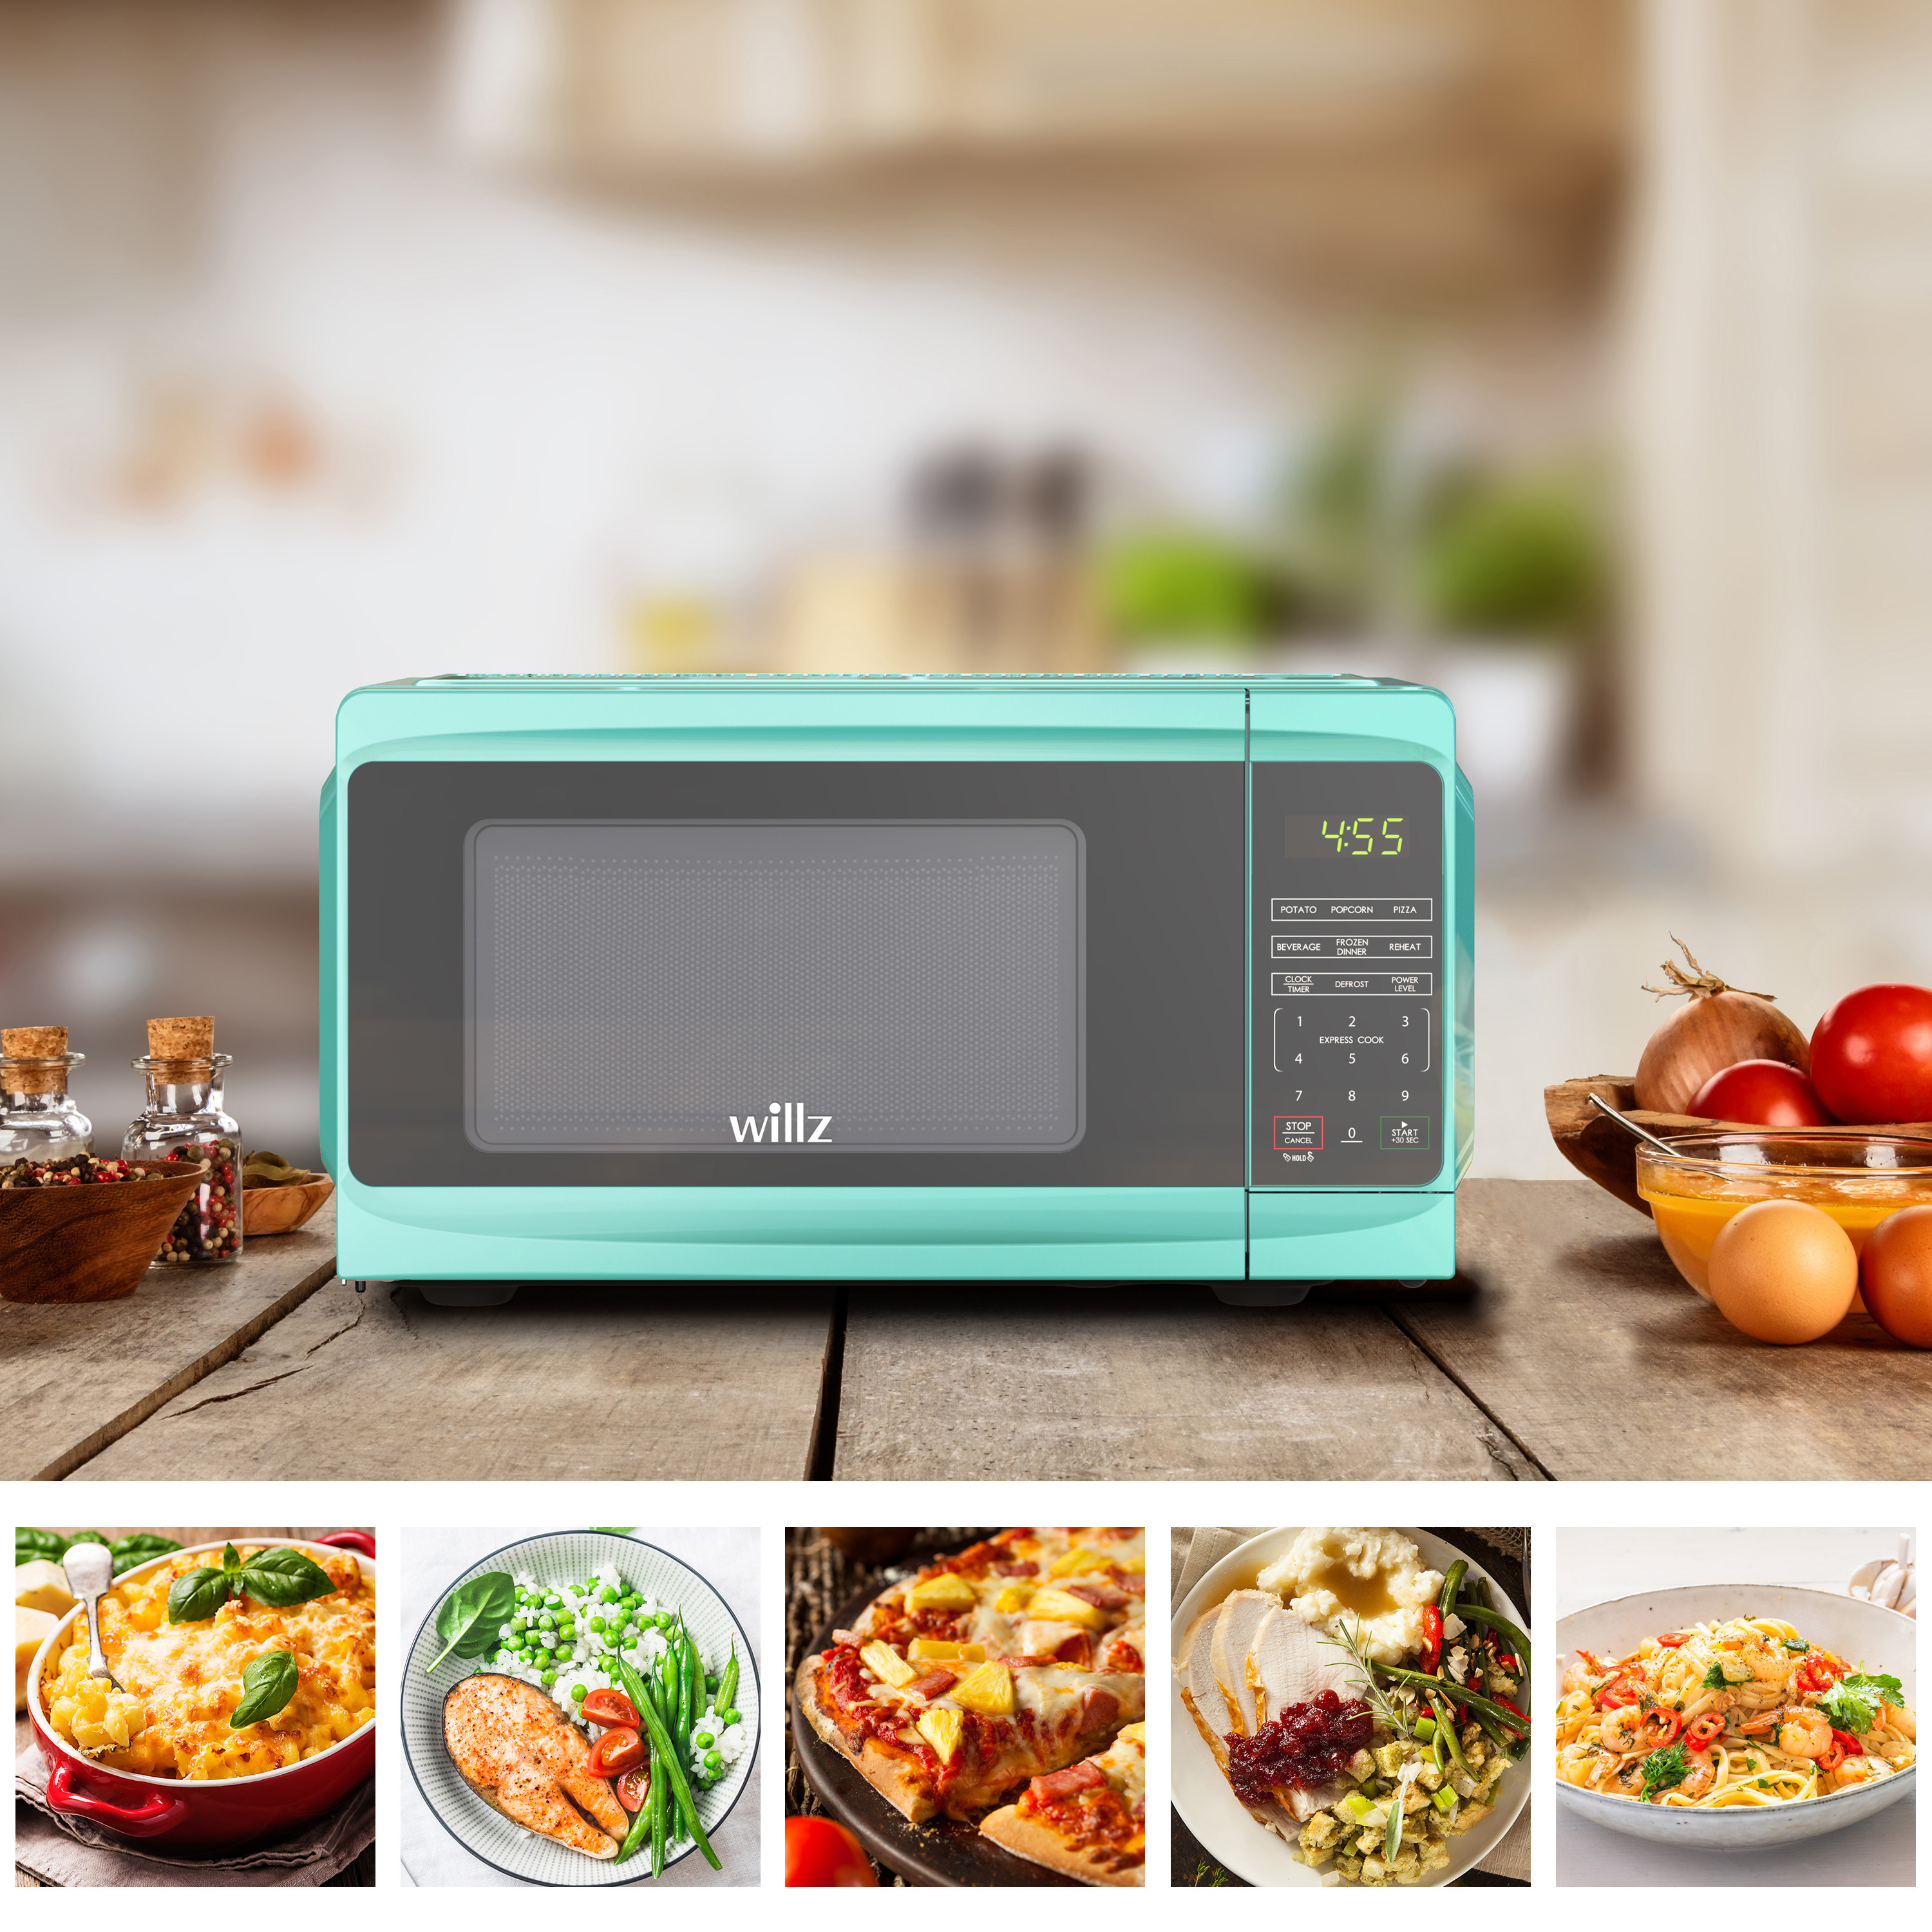 Willz WLCMV807GN-07 0.7 Cu.Ft. Countertop Microwave Oven, Green - image 5 of 7